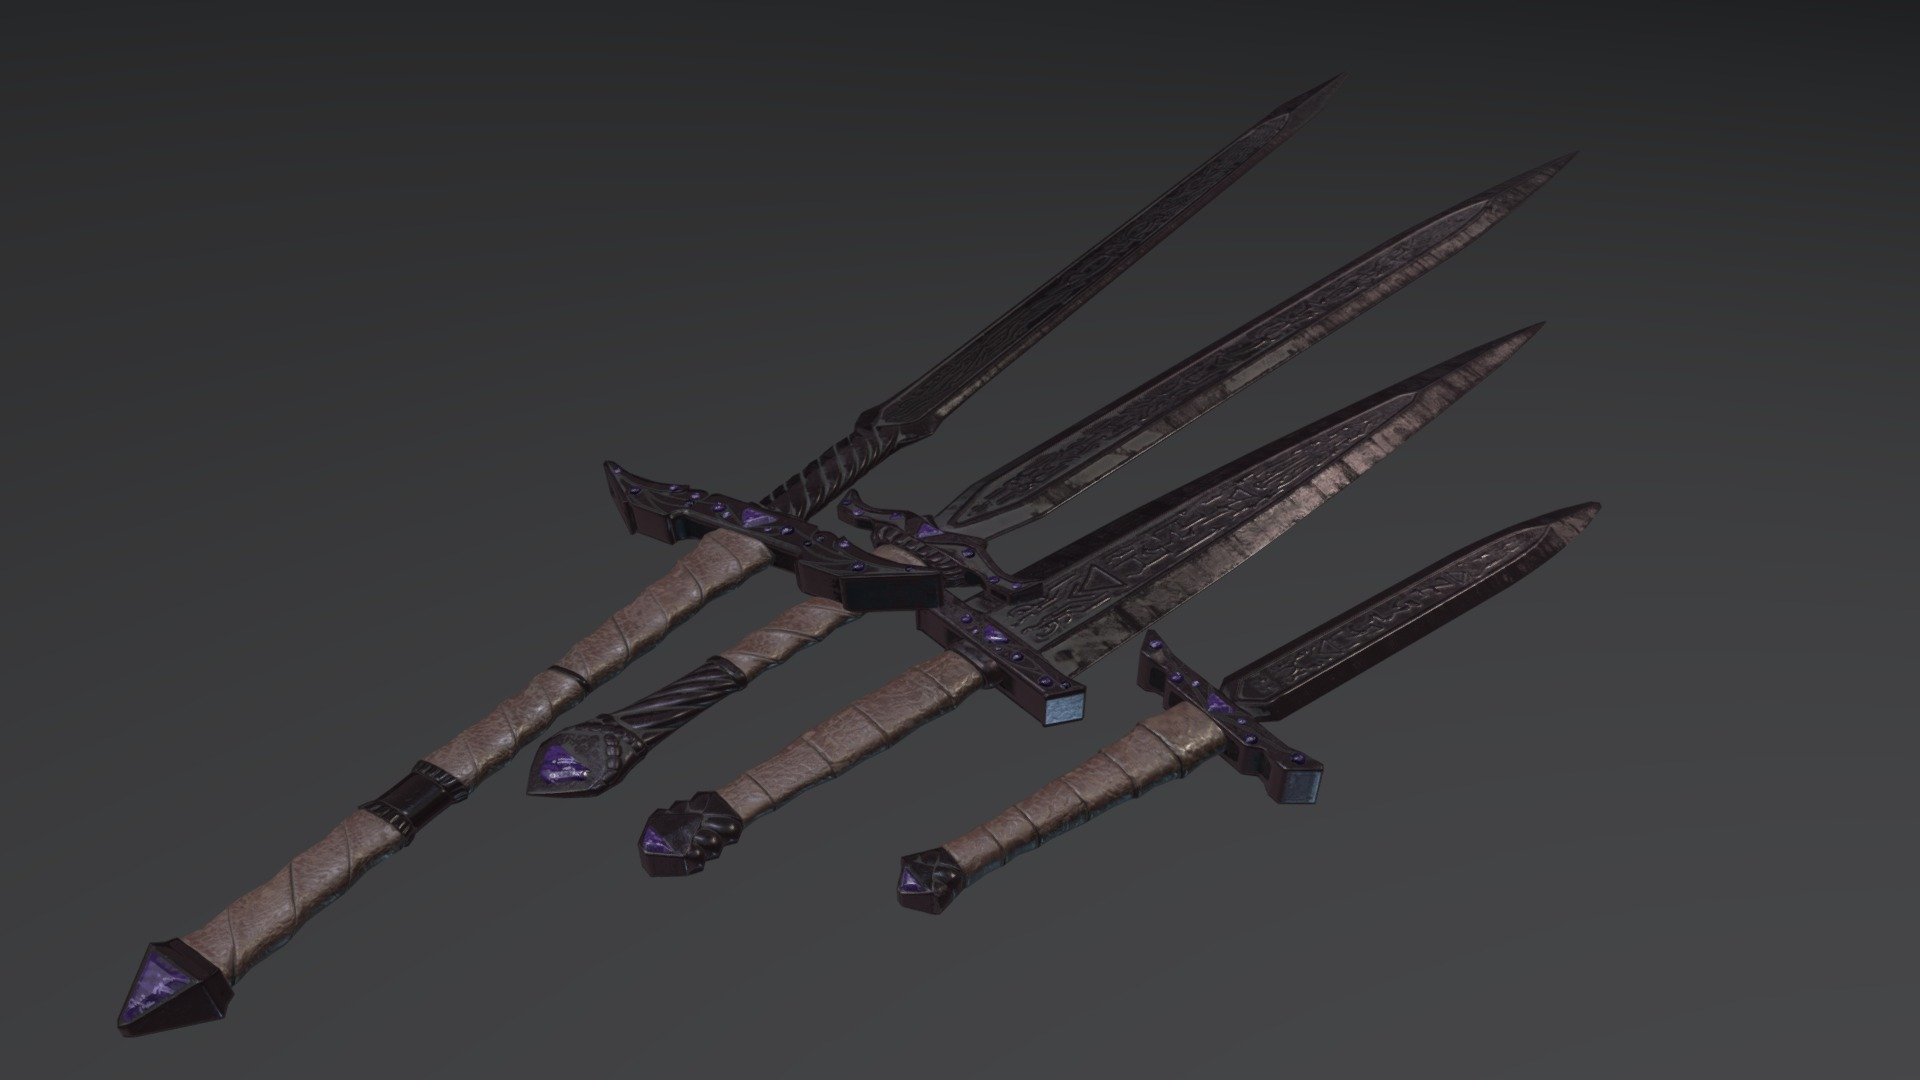 These are a the swords from the ebony weapon set I made for Skywind.
Concept art was made by DalSifoDyas: 
https://www.artstation.com/artwork/4XoO08

Check out the project here:
https://tesrskywind.com/ - Skywind Ebony Swords - 3D model by Urkenstaff 3d model